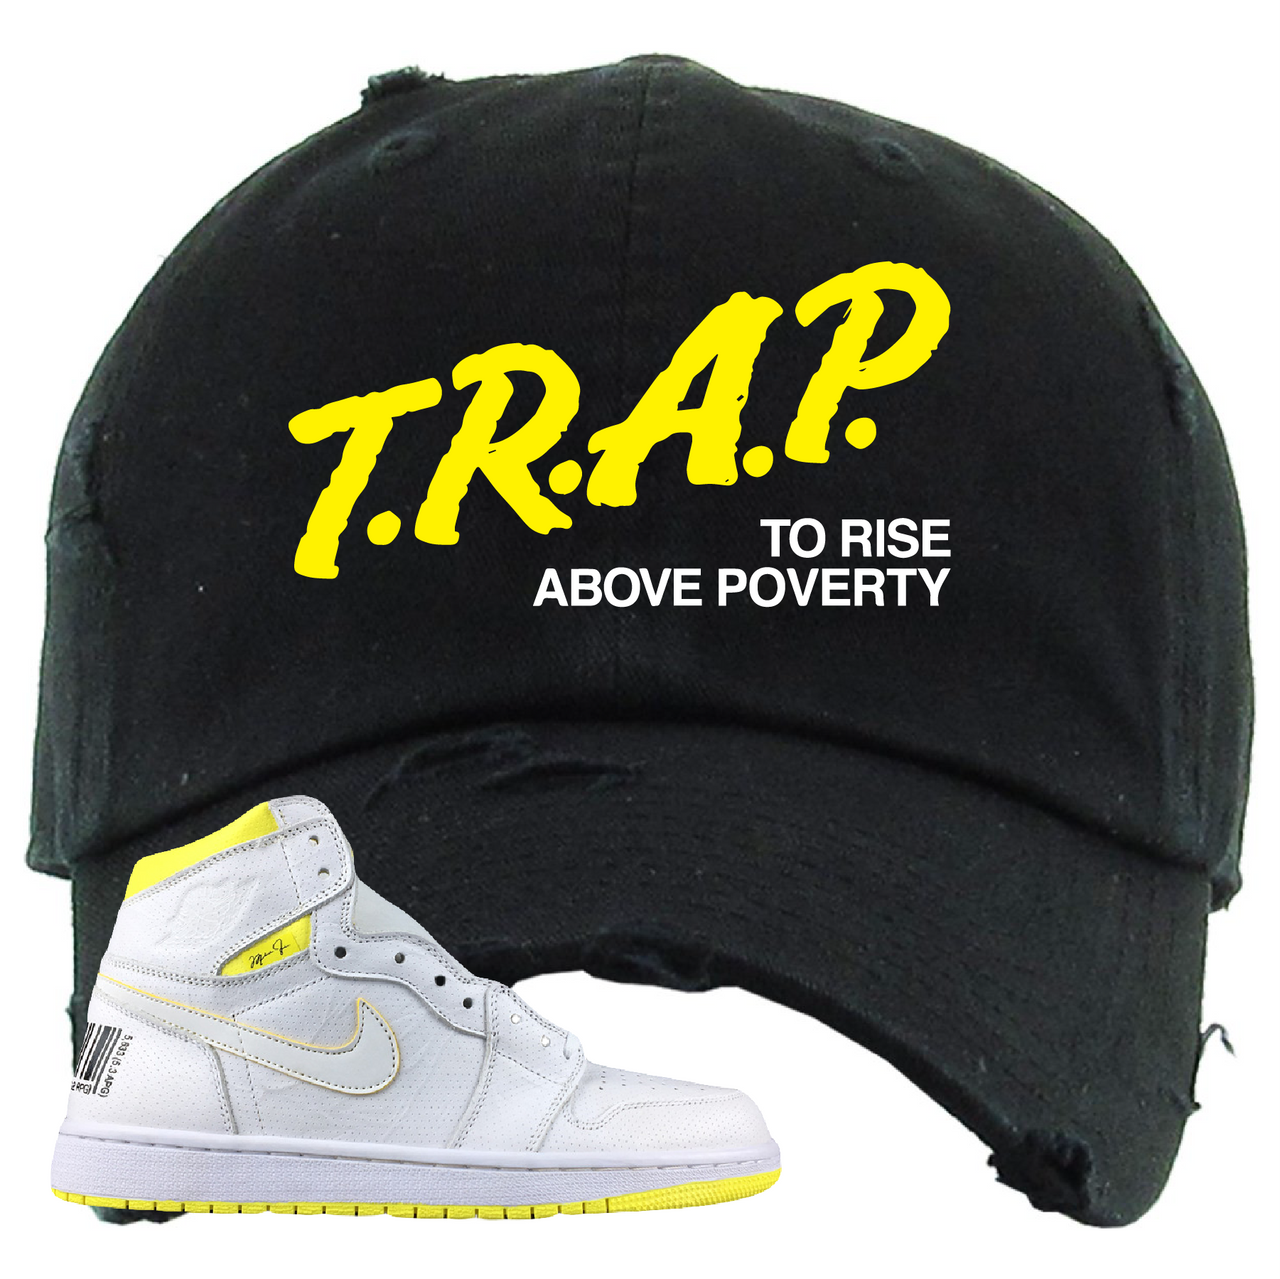 Jordan 1 First Class Flight Trap To Rise Above Poverty Sneaker Matching Black Distressed Dad Hat